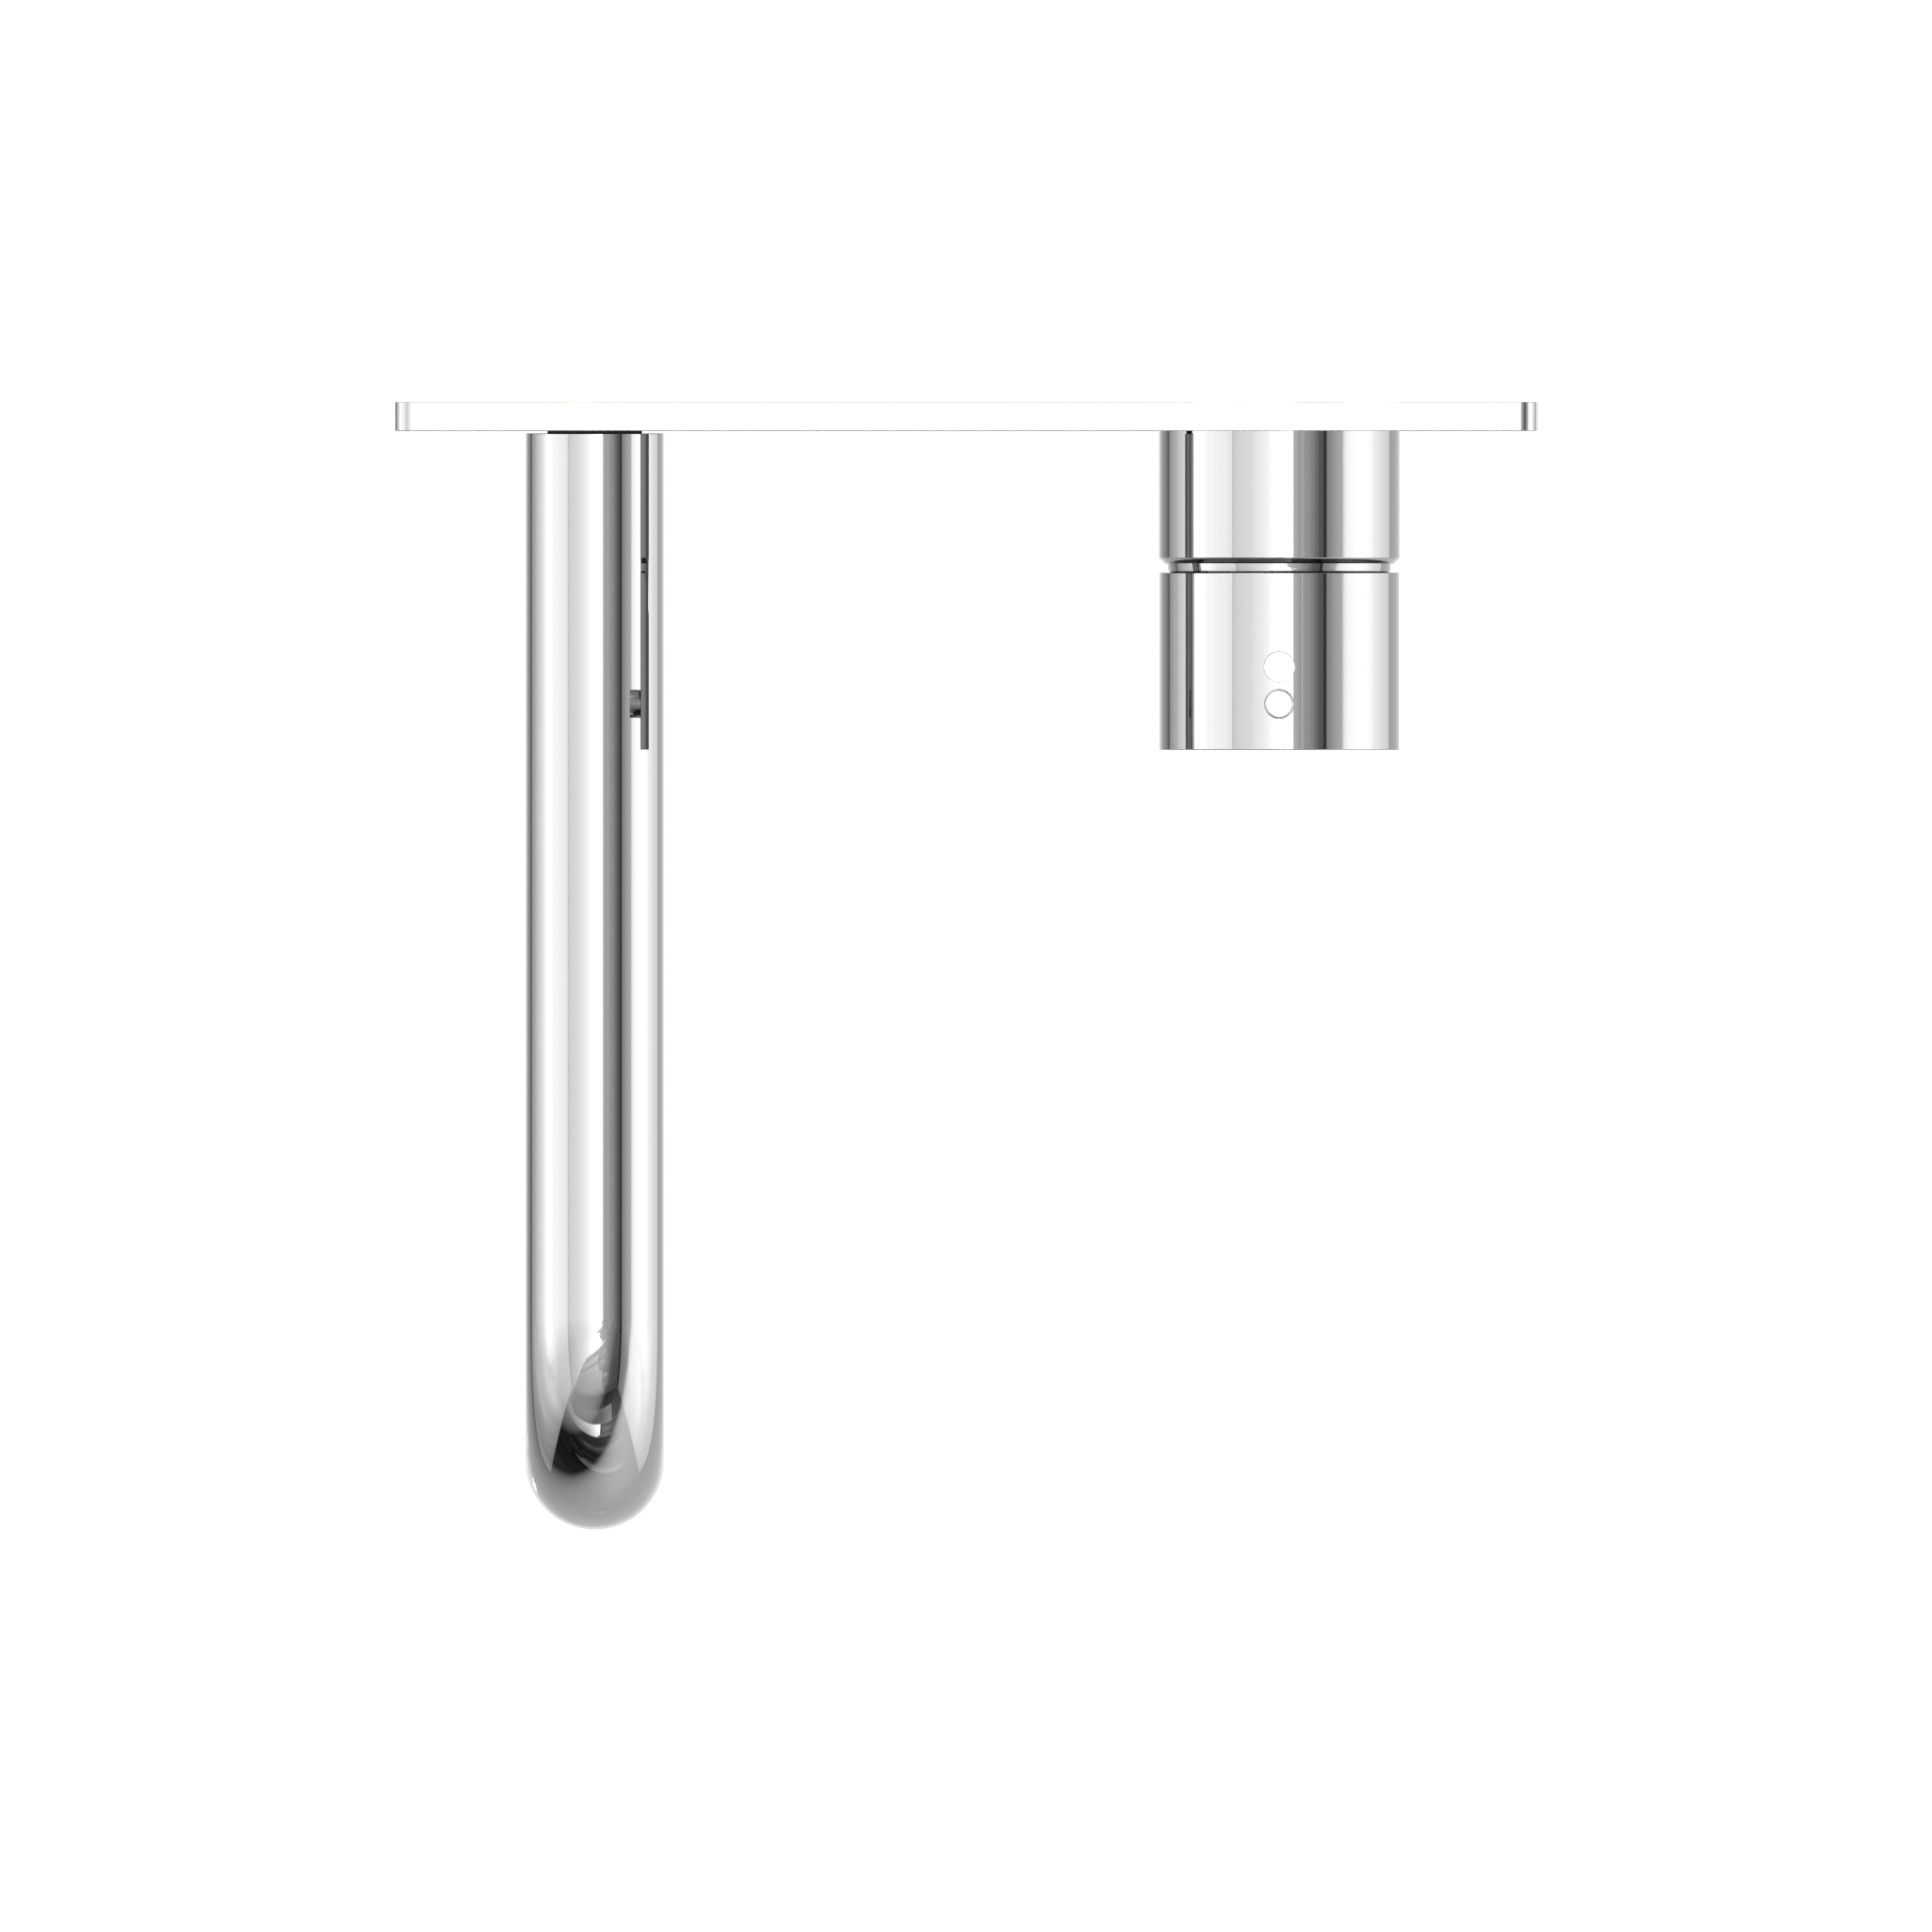 NERO MECCA WALL BASIN/BATH MIXER HANDLE UP CHROME  (AVAILABLE IN 120MM,160MM,185MM, 230MM AND 260MM)